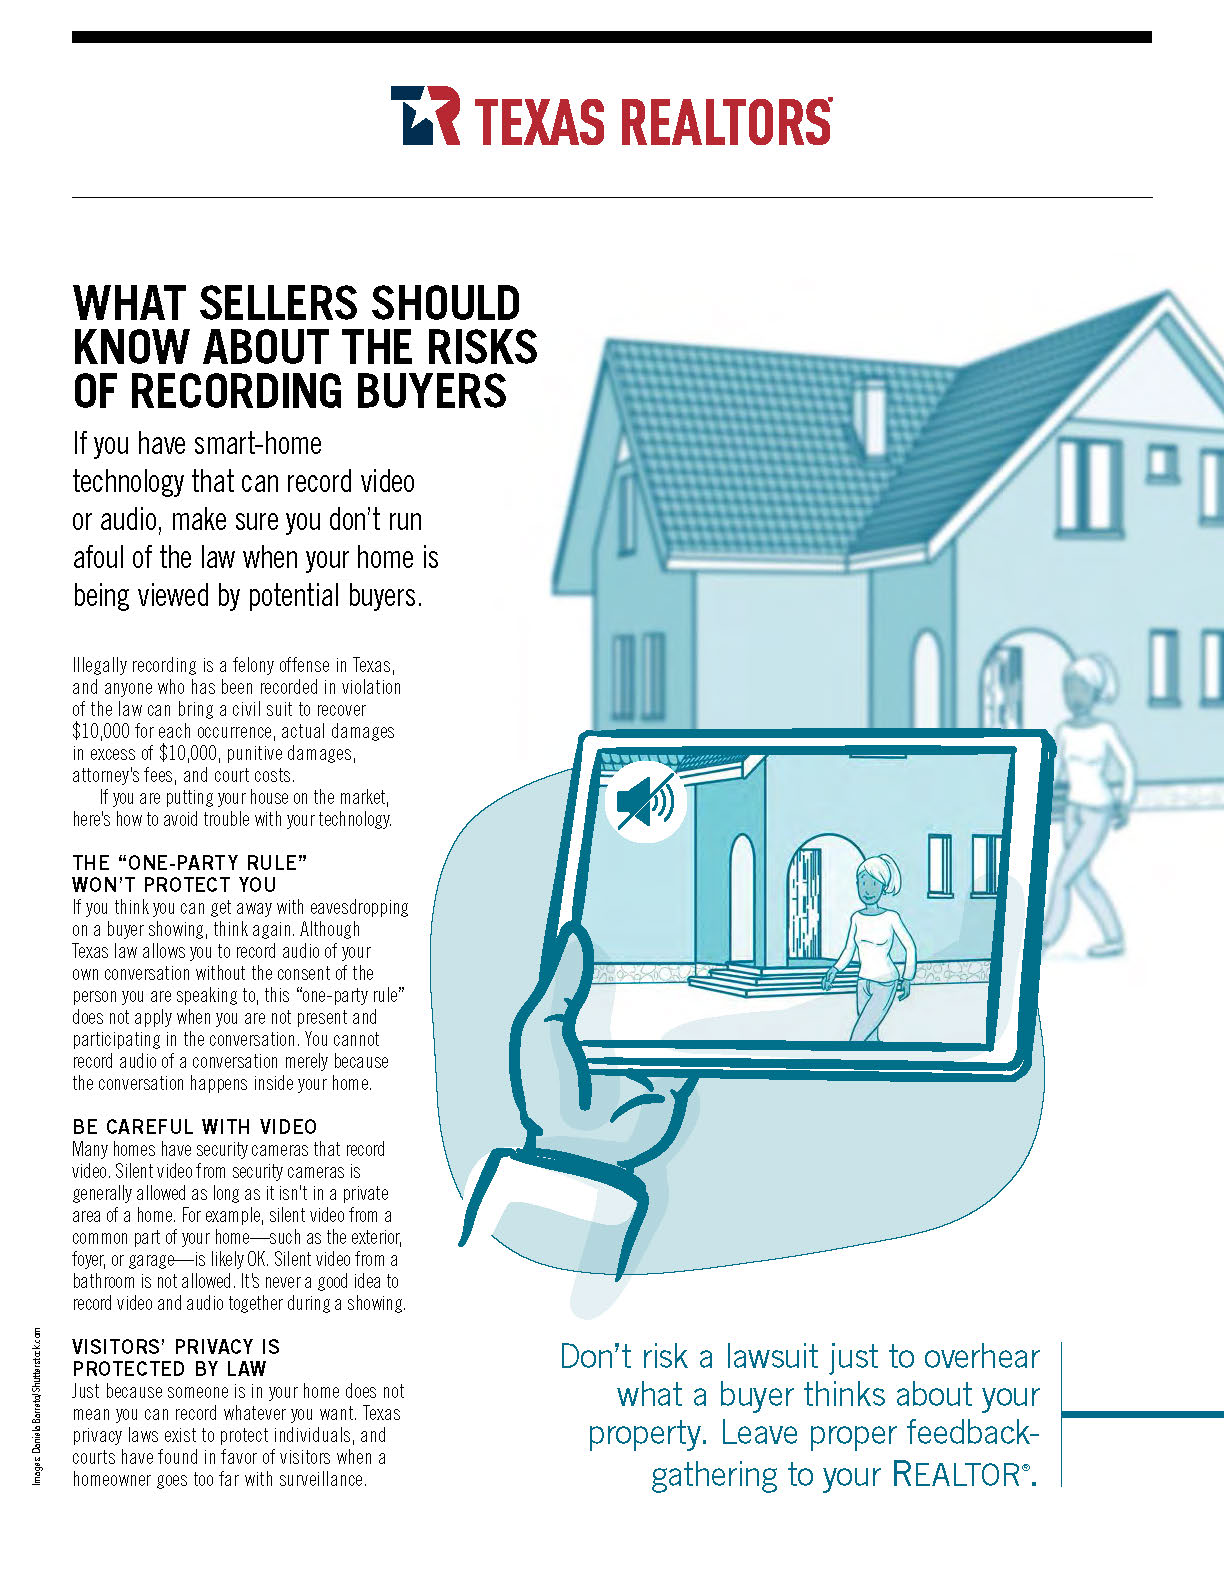 WHAT SELLERS SHOULD KNOW ABOUT THE RISKS OF RECORDING BUYERS